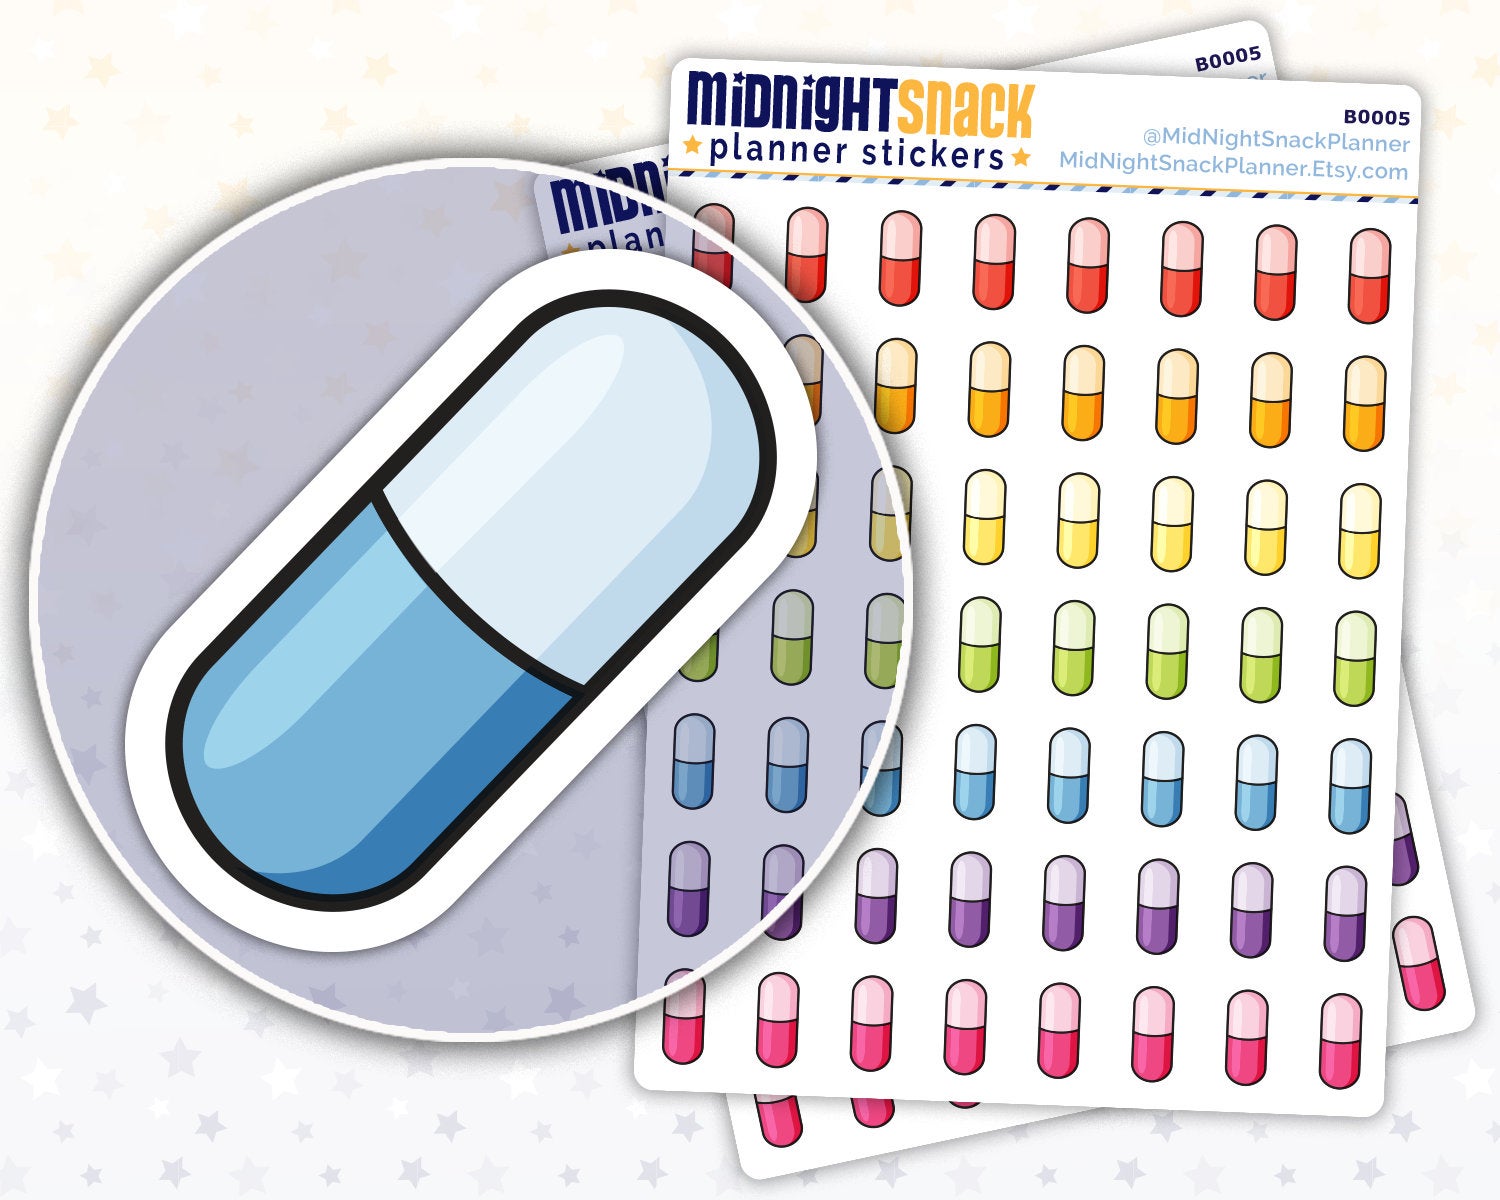 Pill or Vitamin Reminder Planner Stickers from Midnight Snack Planner